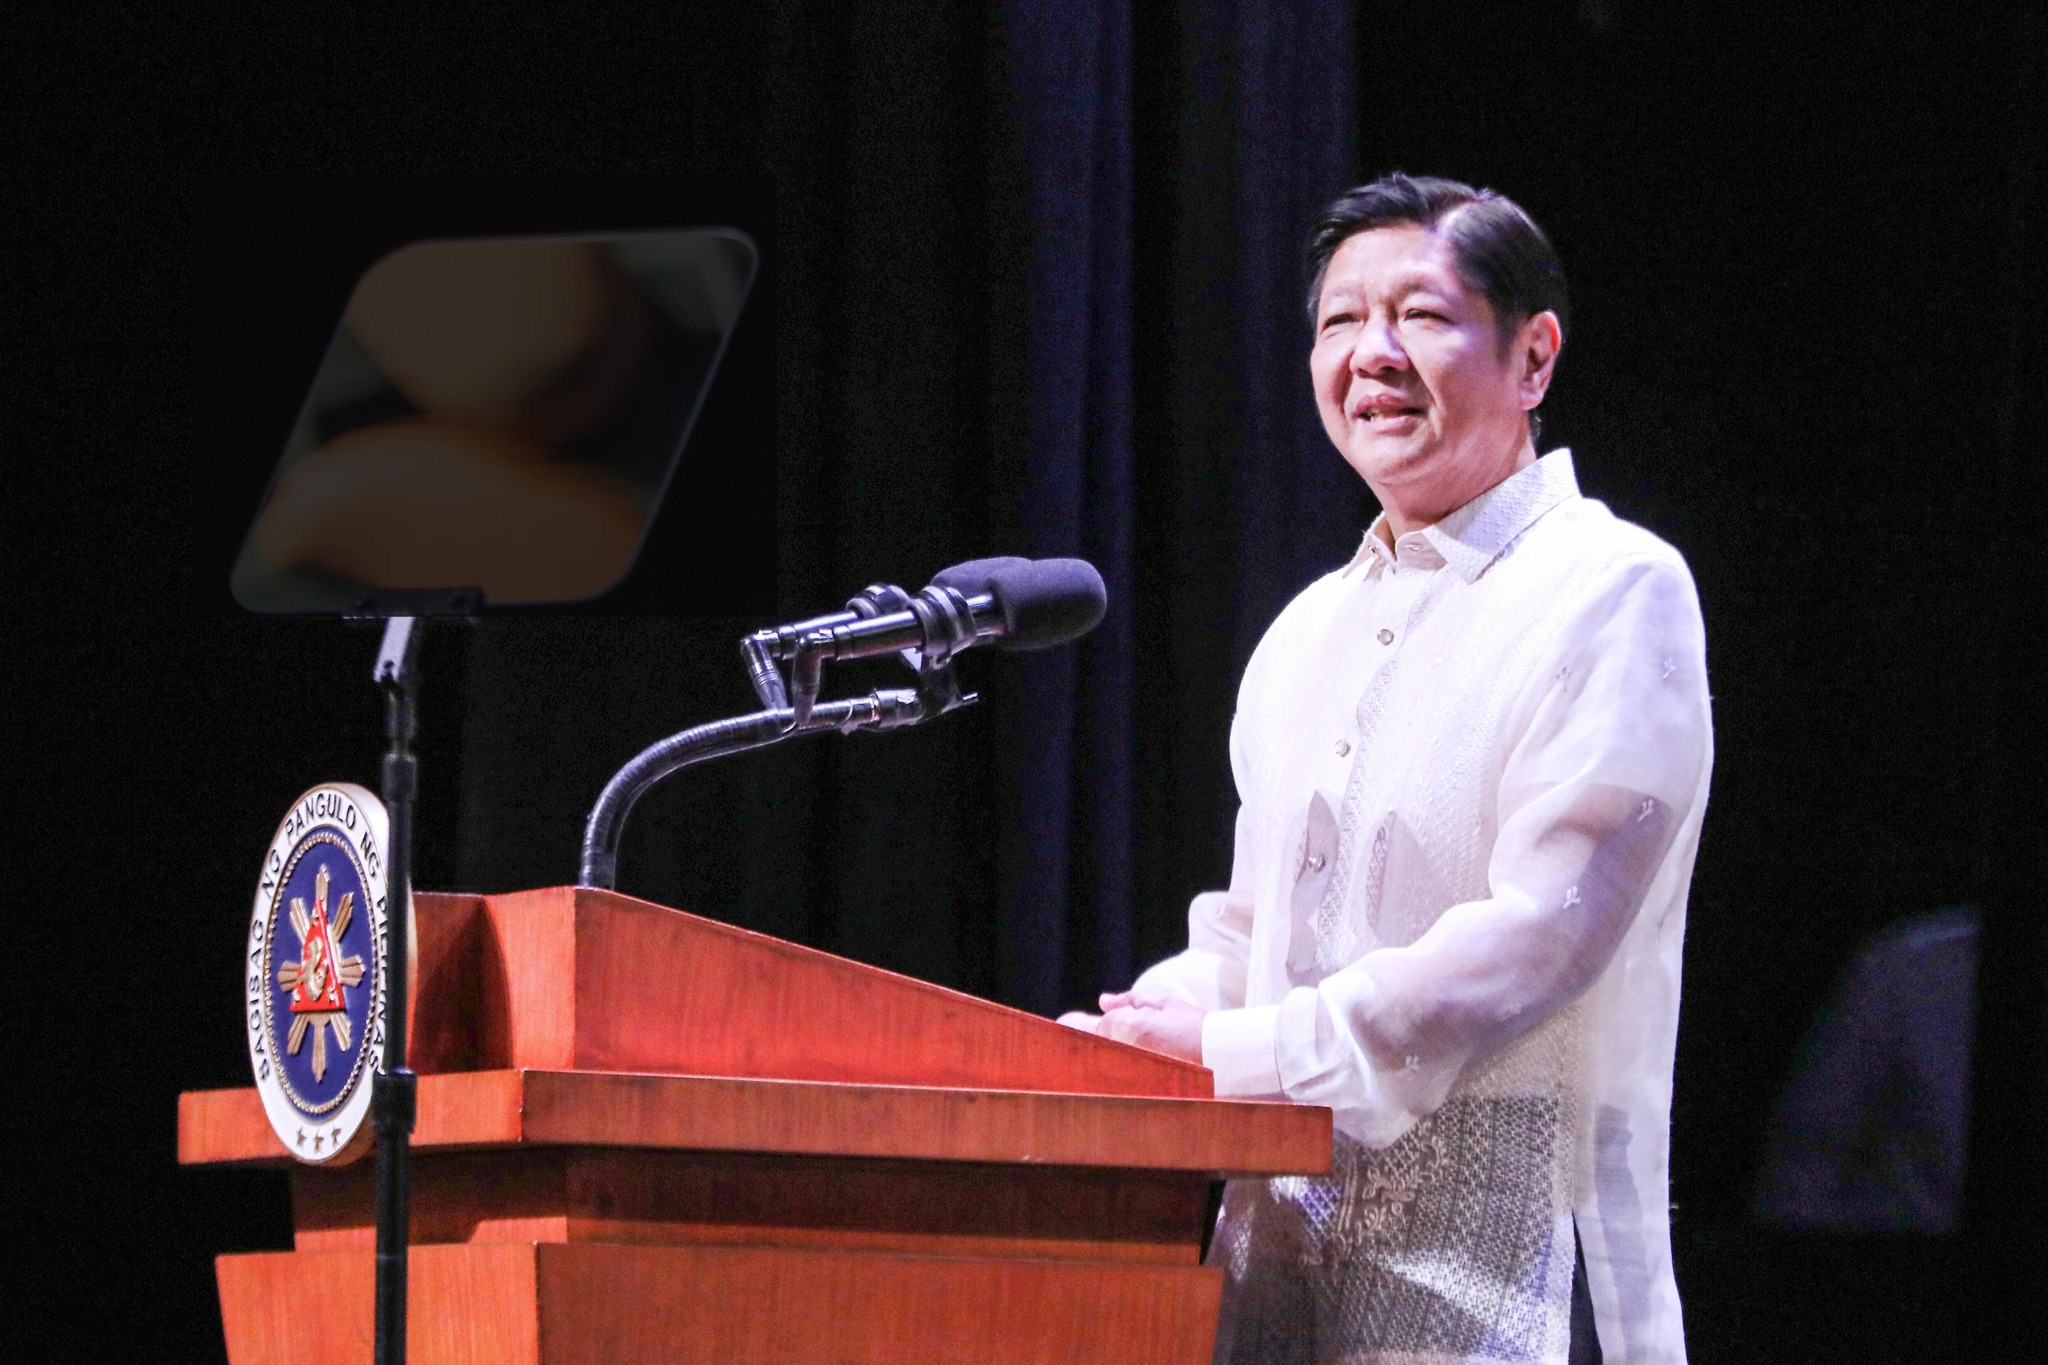 marcos laughs off allegation linking him to drugs